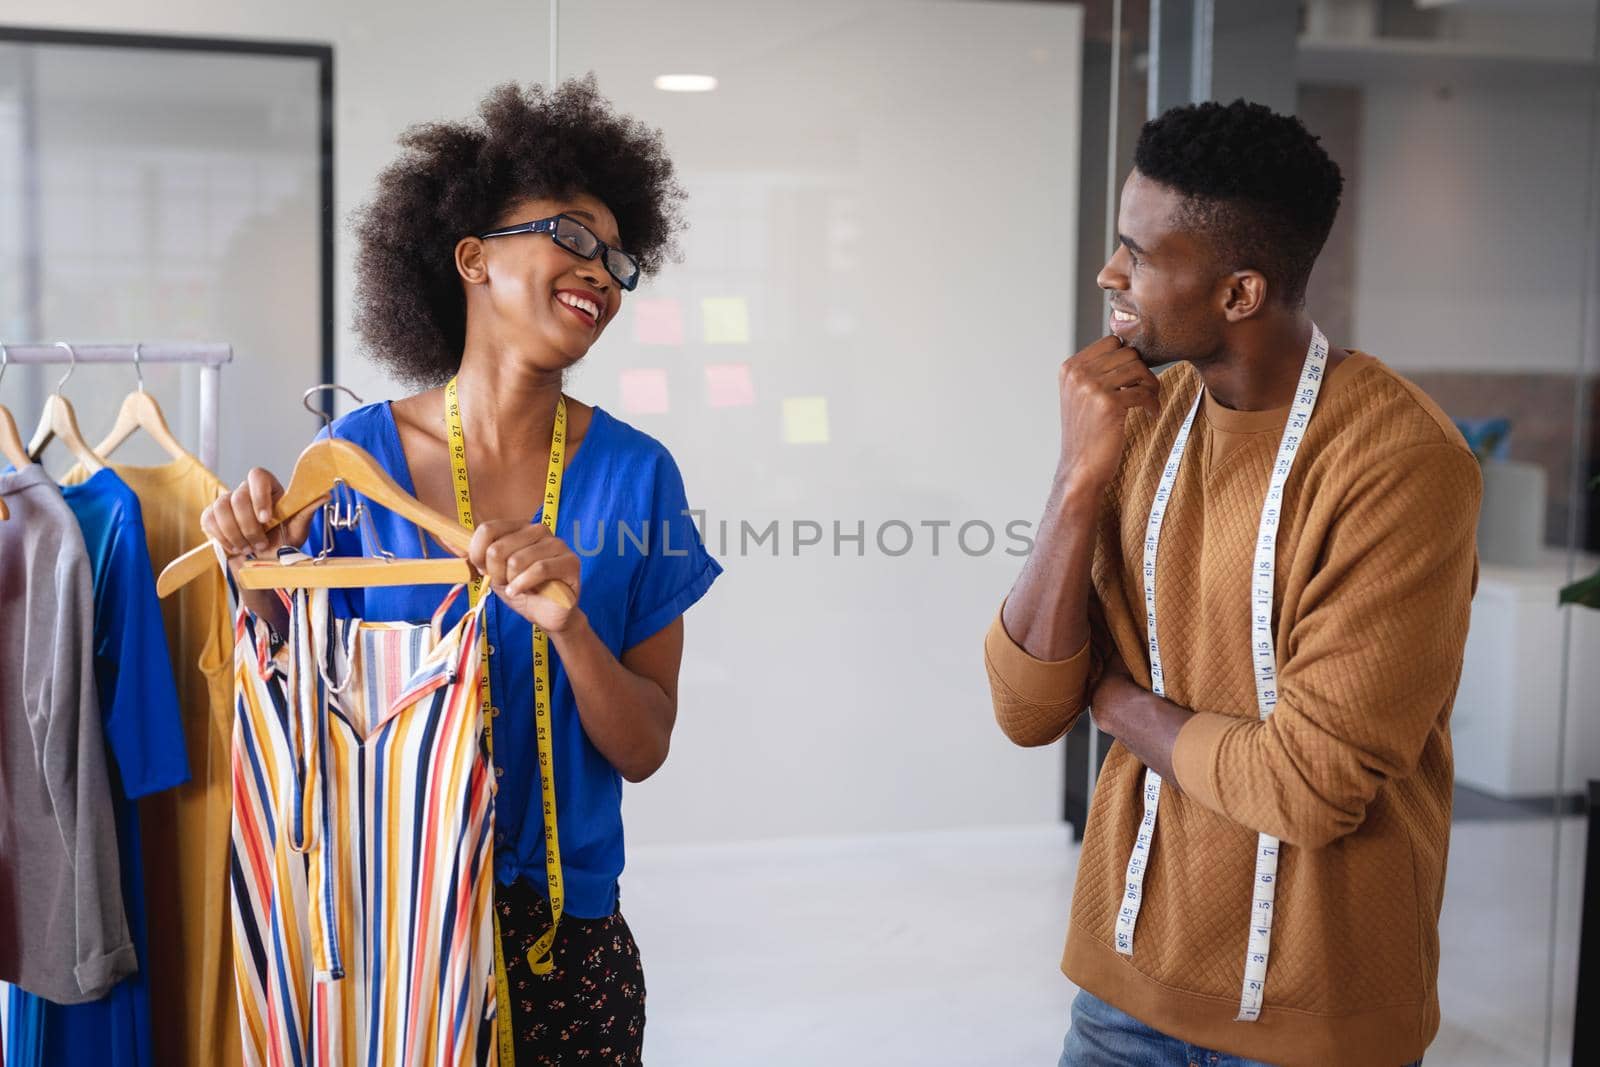 Diverse male and female fashion designers at work discussing and looking at clothes. independent creative design business.